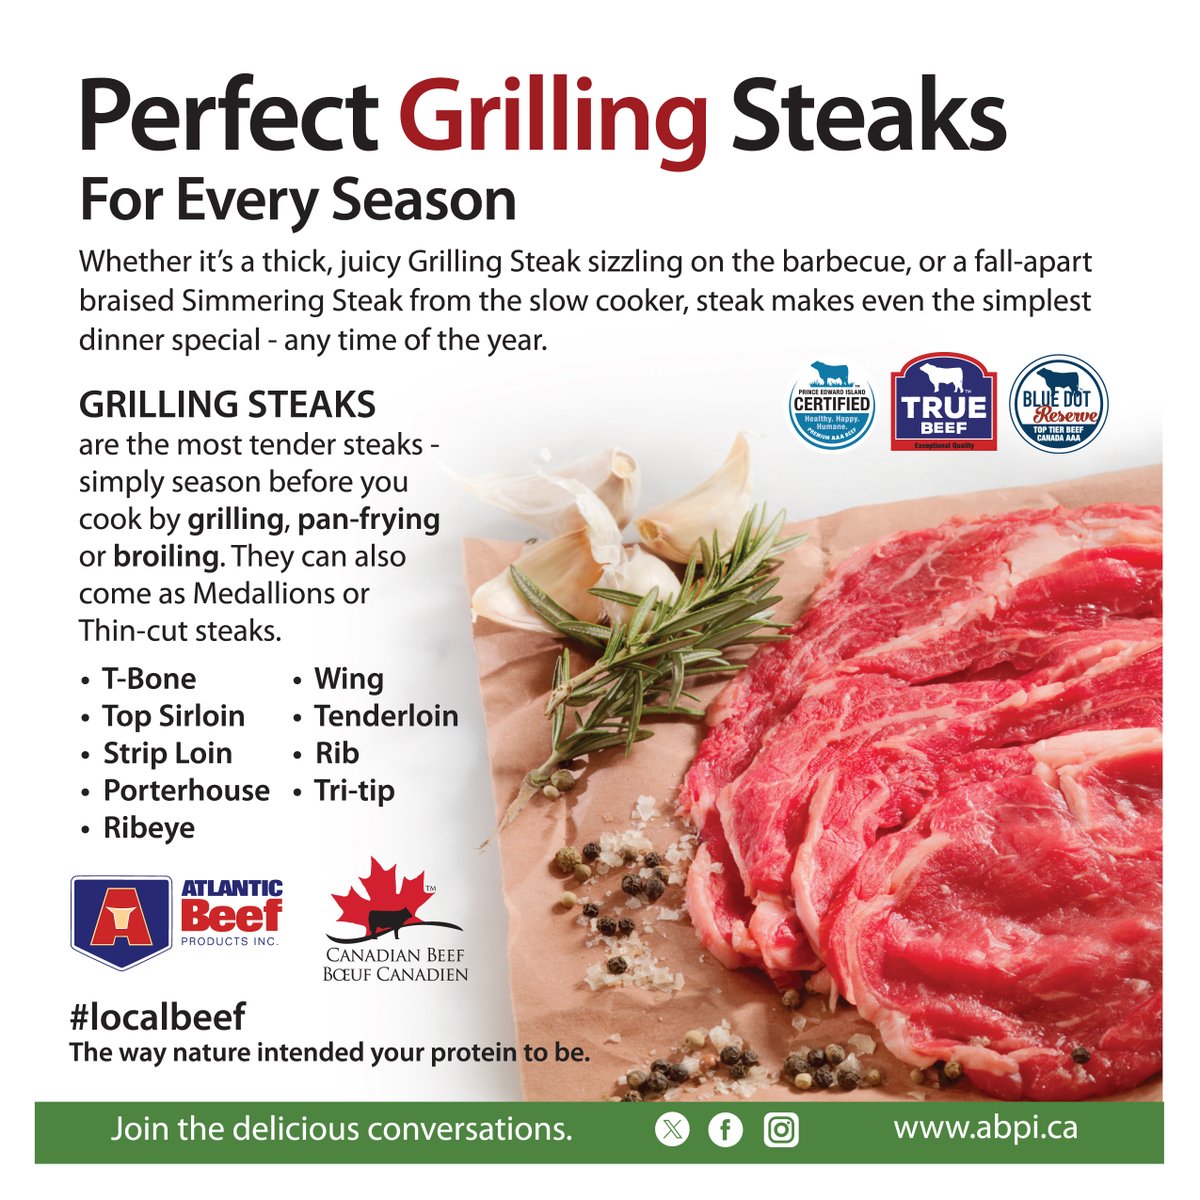 Steak makes even the simplest dinner special - any time of the year. #LocalBeef for Every Season. abpi.ca #PEIBeef #IslandBeef #SustainableBeef #SafeBeef #Protein #LocalBeef #HealthyBeef #BrainHealth #ThinkBeef